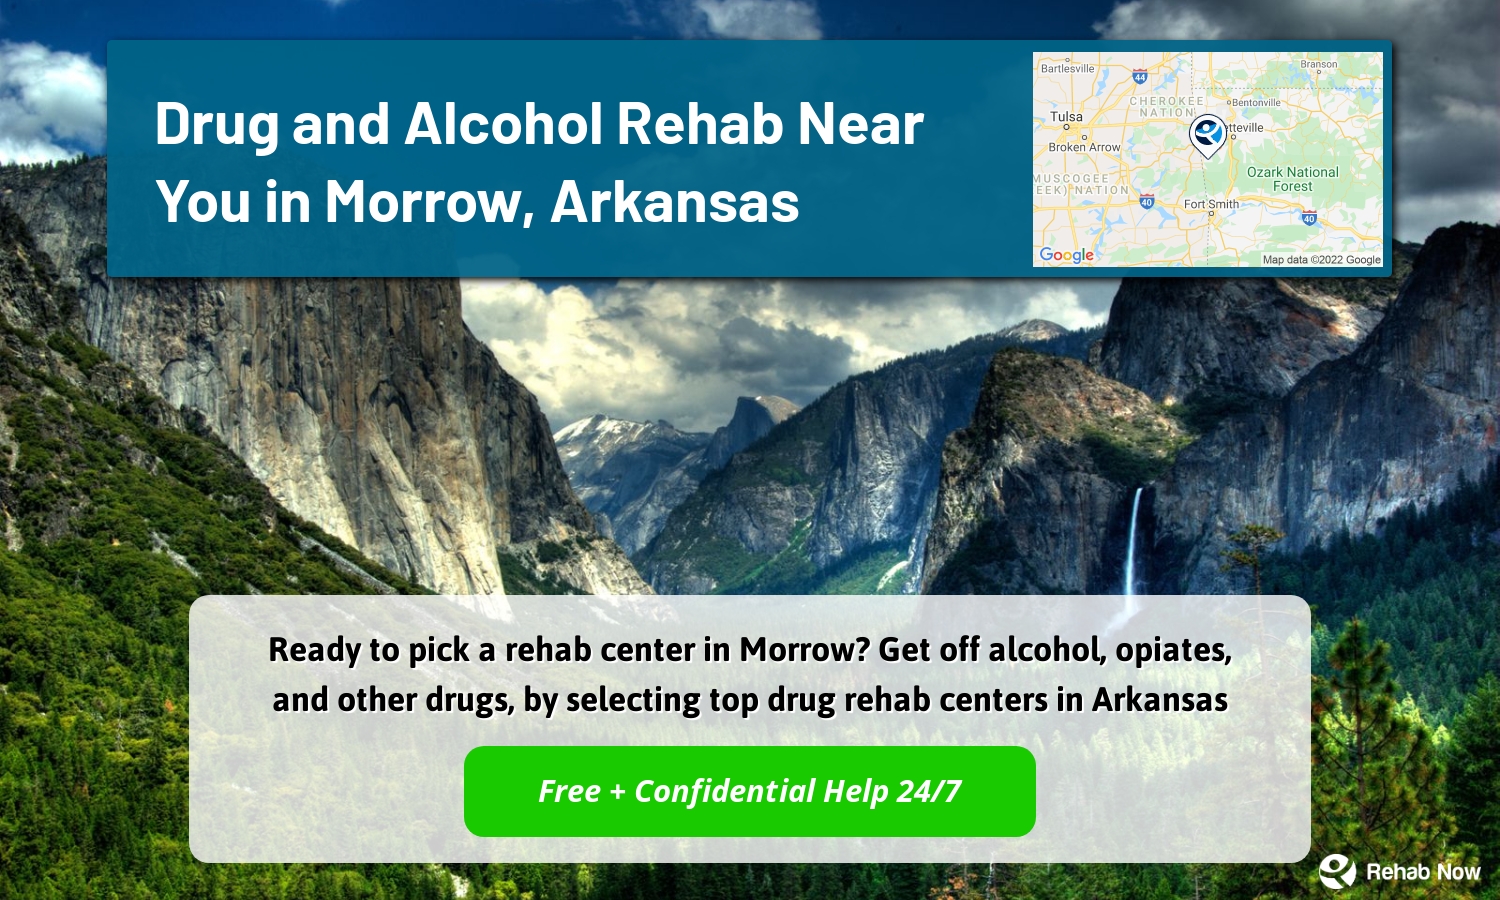 Ready to pick a rehab center in Morrow? Get off alcohol, opiates, and other drugs, by selecting top drug rehab centers in Arkansas